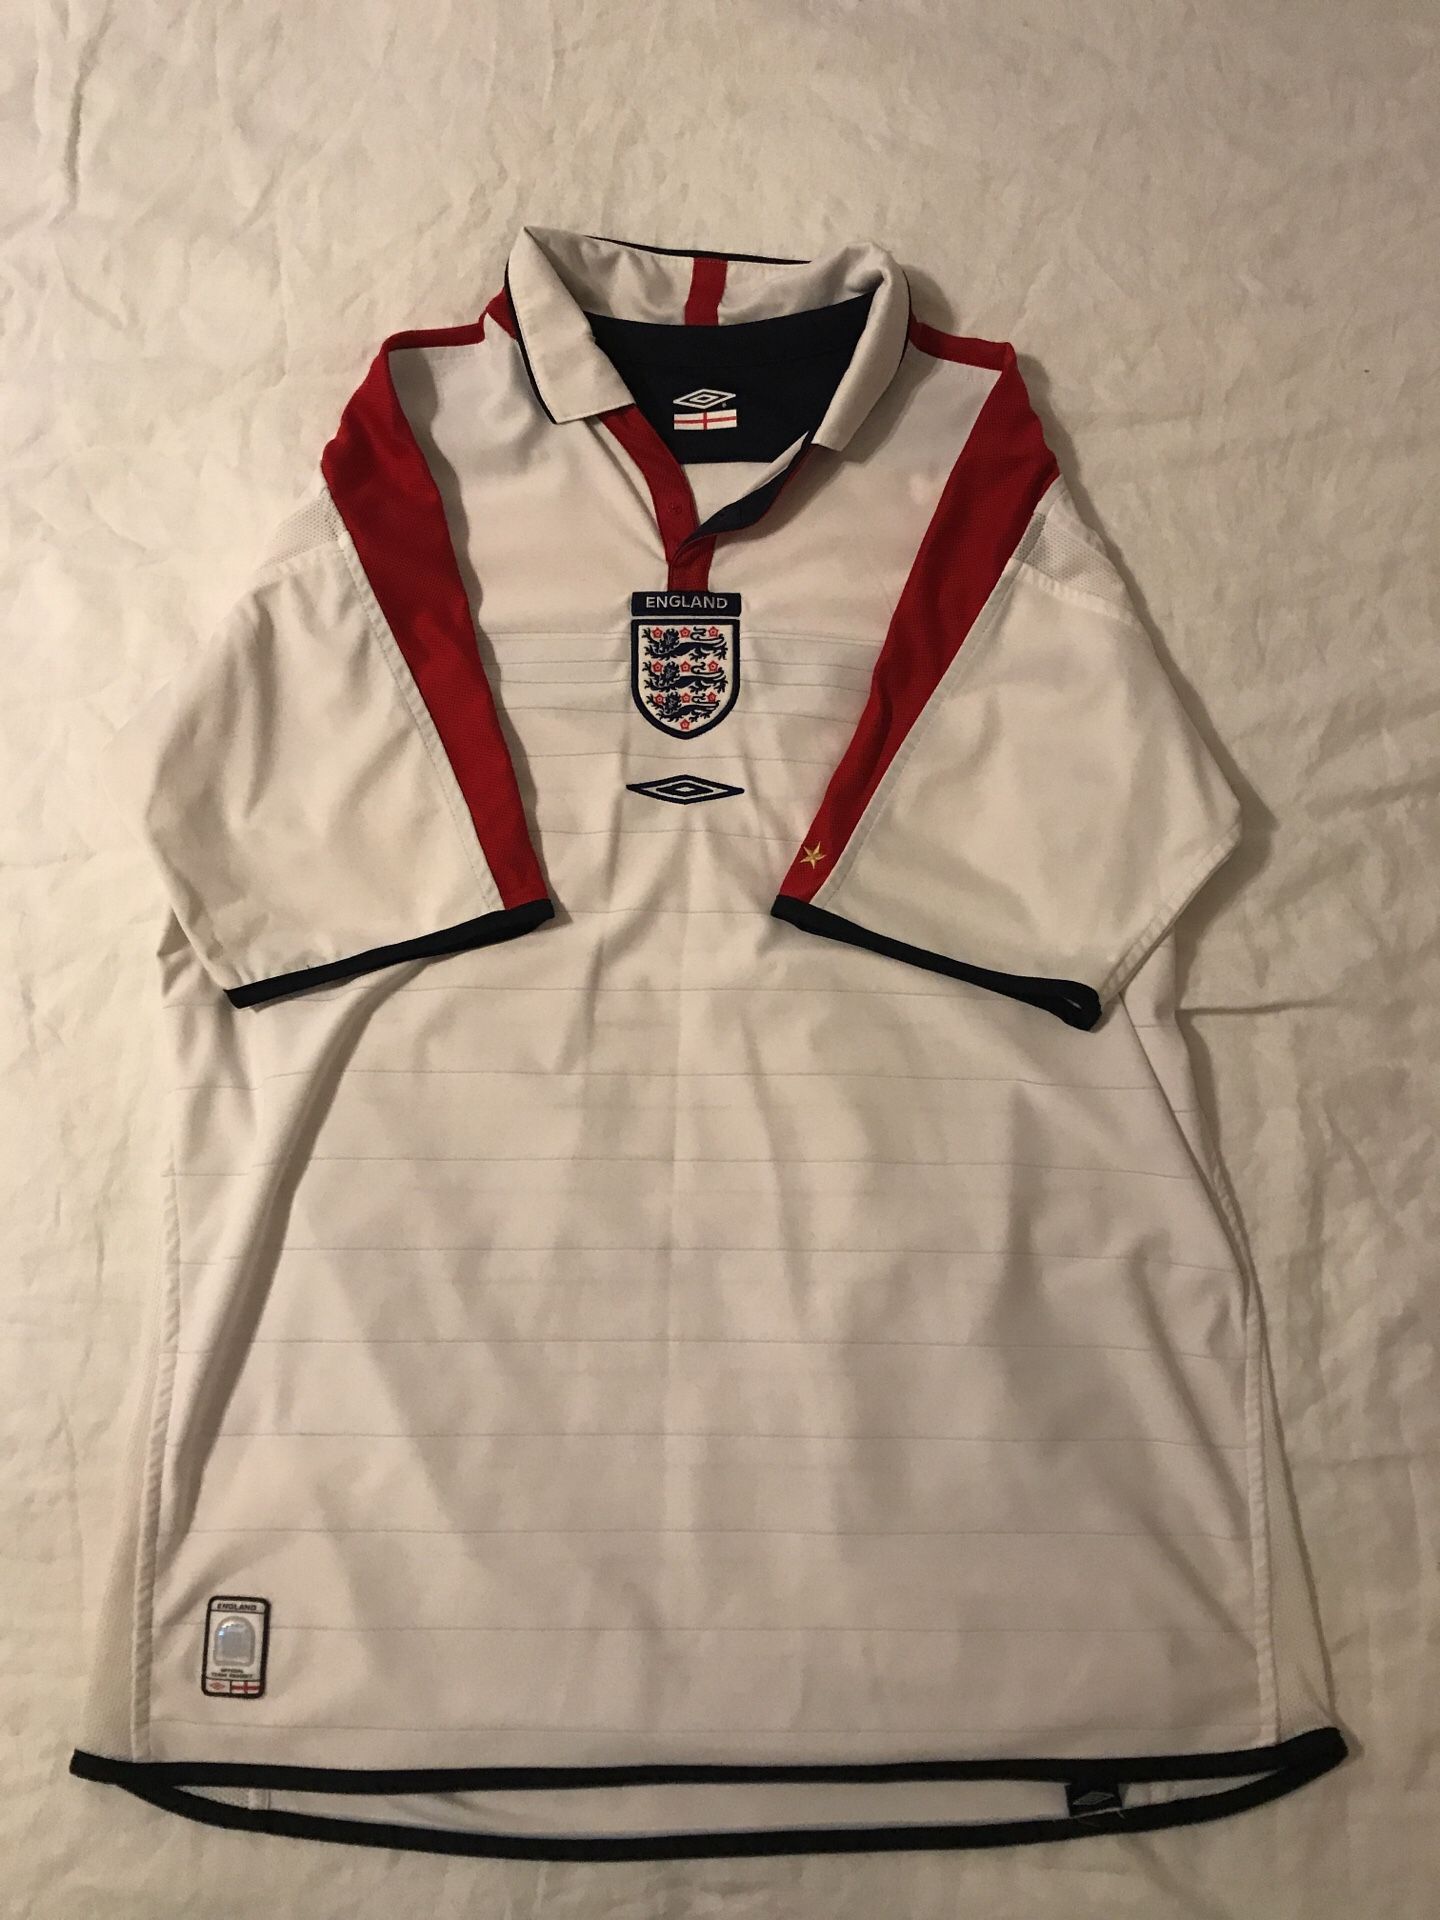 Team England 2002 World Cup Soccer Jersey Men’s Large